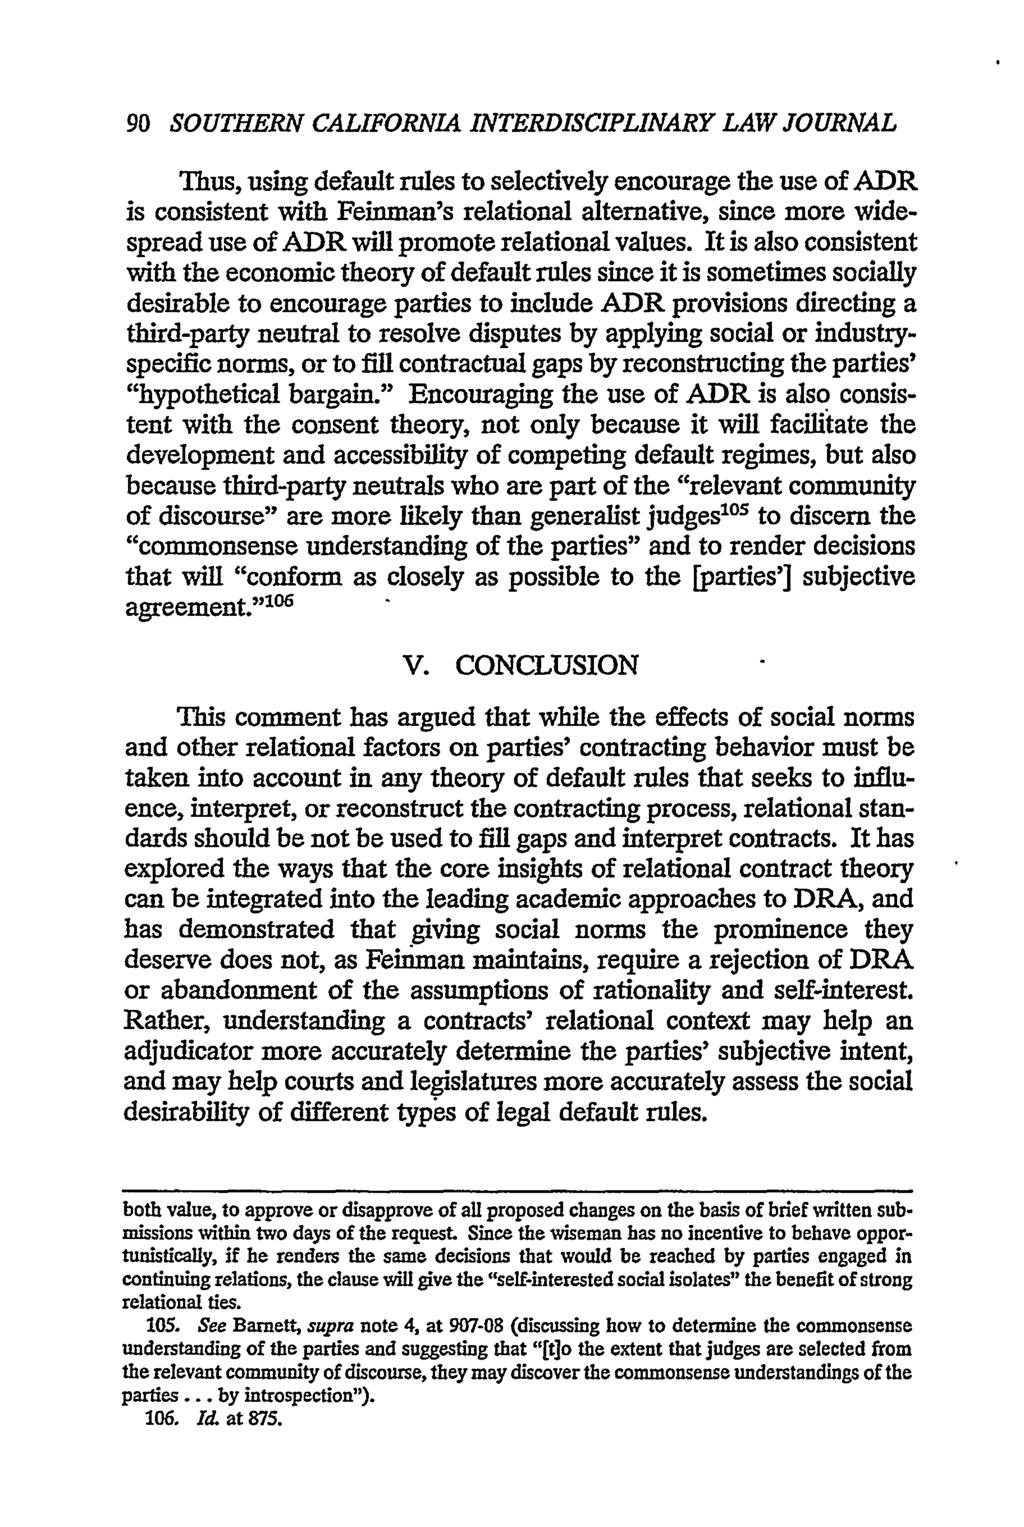 90 SOUTHERN CALIFORNIA INTERDISCIPLINARY LAW JOURNAL Thus, using default rules to selectively encourage the use of ADR is consistent with Feinman's relational alternative, since more widespread use